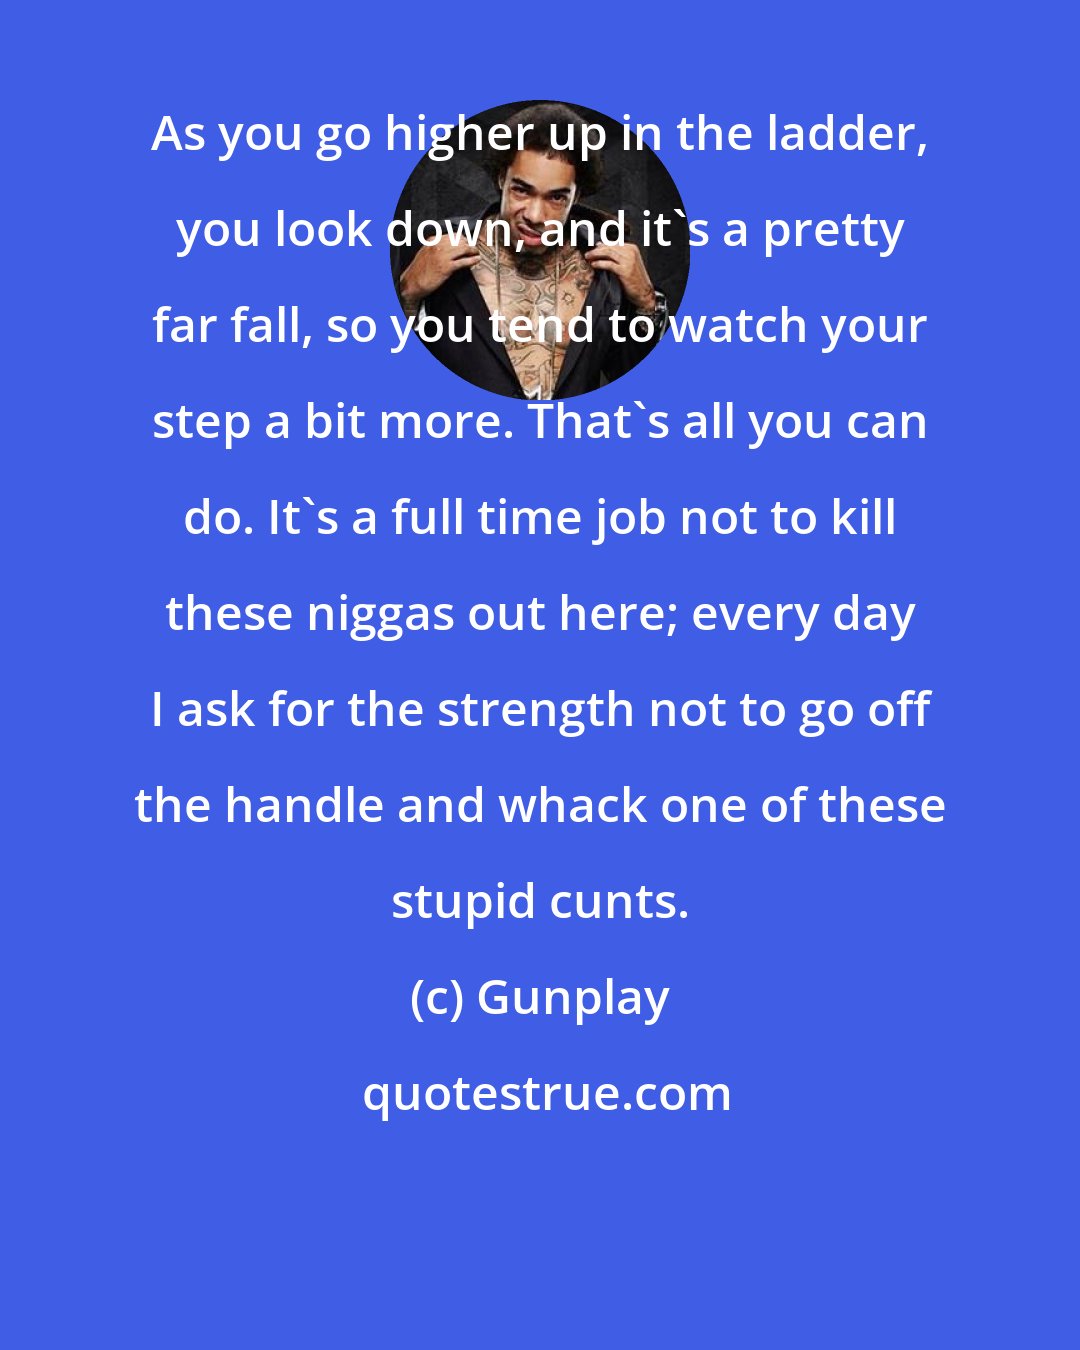 Gunplay: As you go higher up in the ladder, you look down, and it's a pretty far fall, so you tend to watch your step a bit more. That's all you can do. It's a full time job not to kill these niggas out here; every day I ask for the strength not to go off the handle and whack one of these stupid cunts.